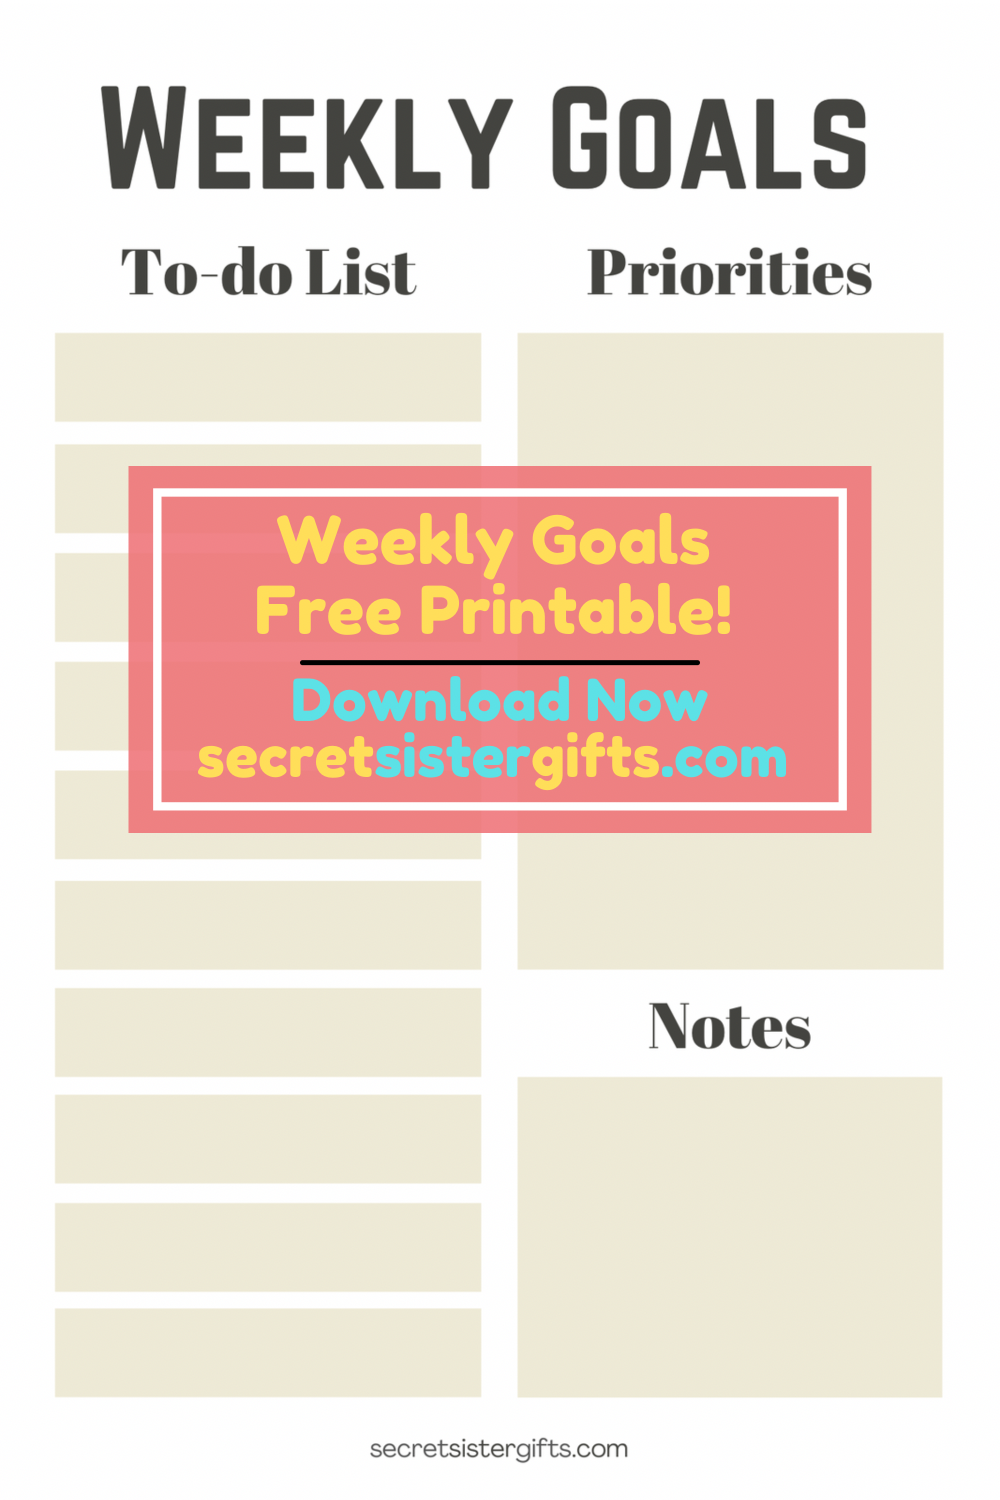 Printable Sheet for Your Weekly Goals